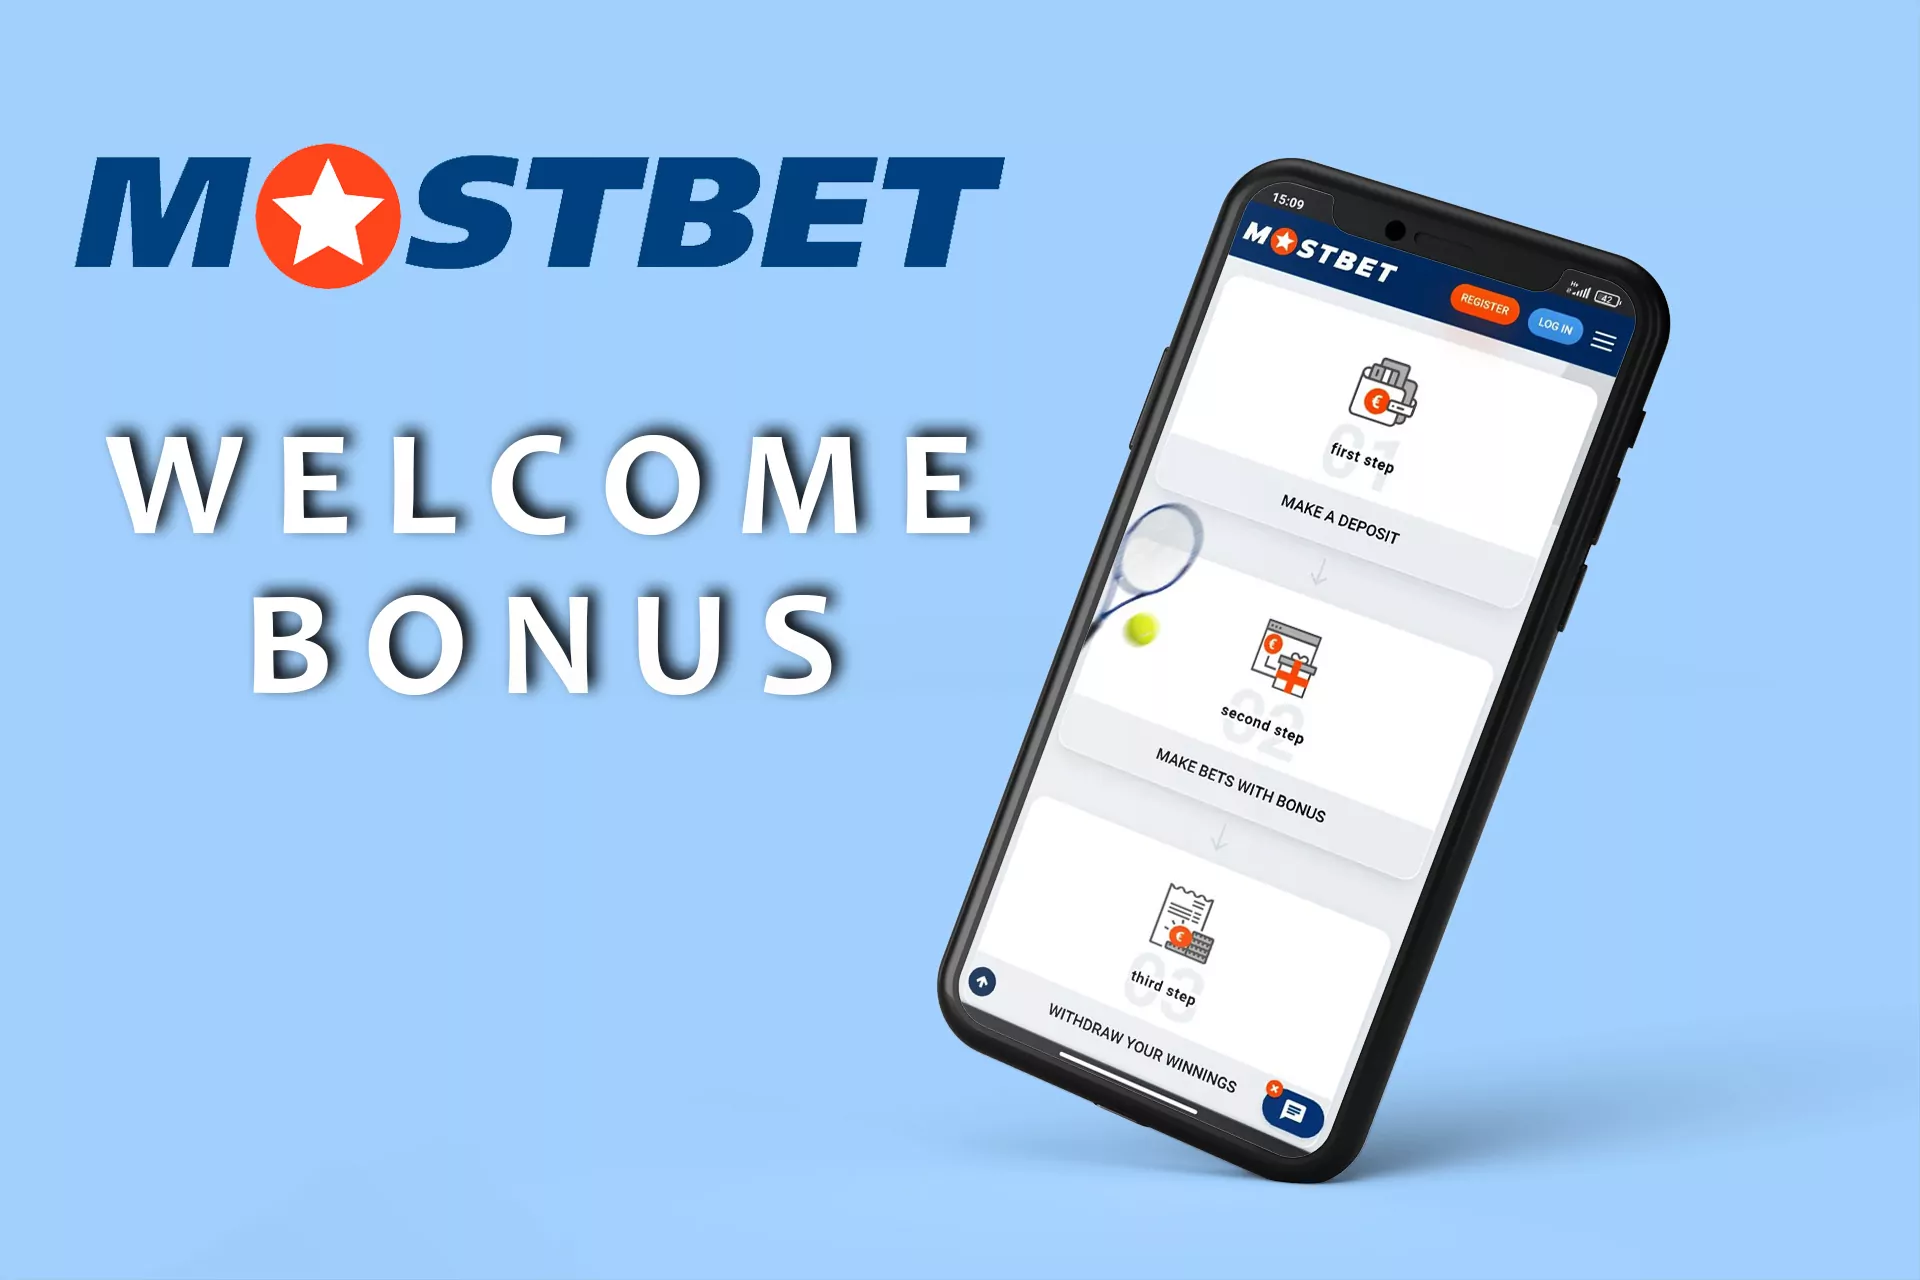 Get a Mostbet bonus on your first deposit of 100%.